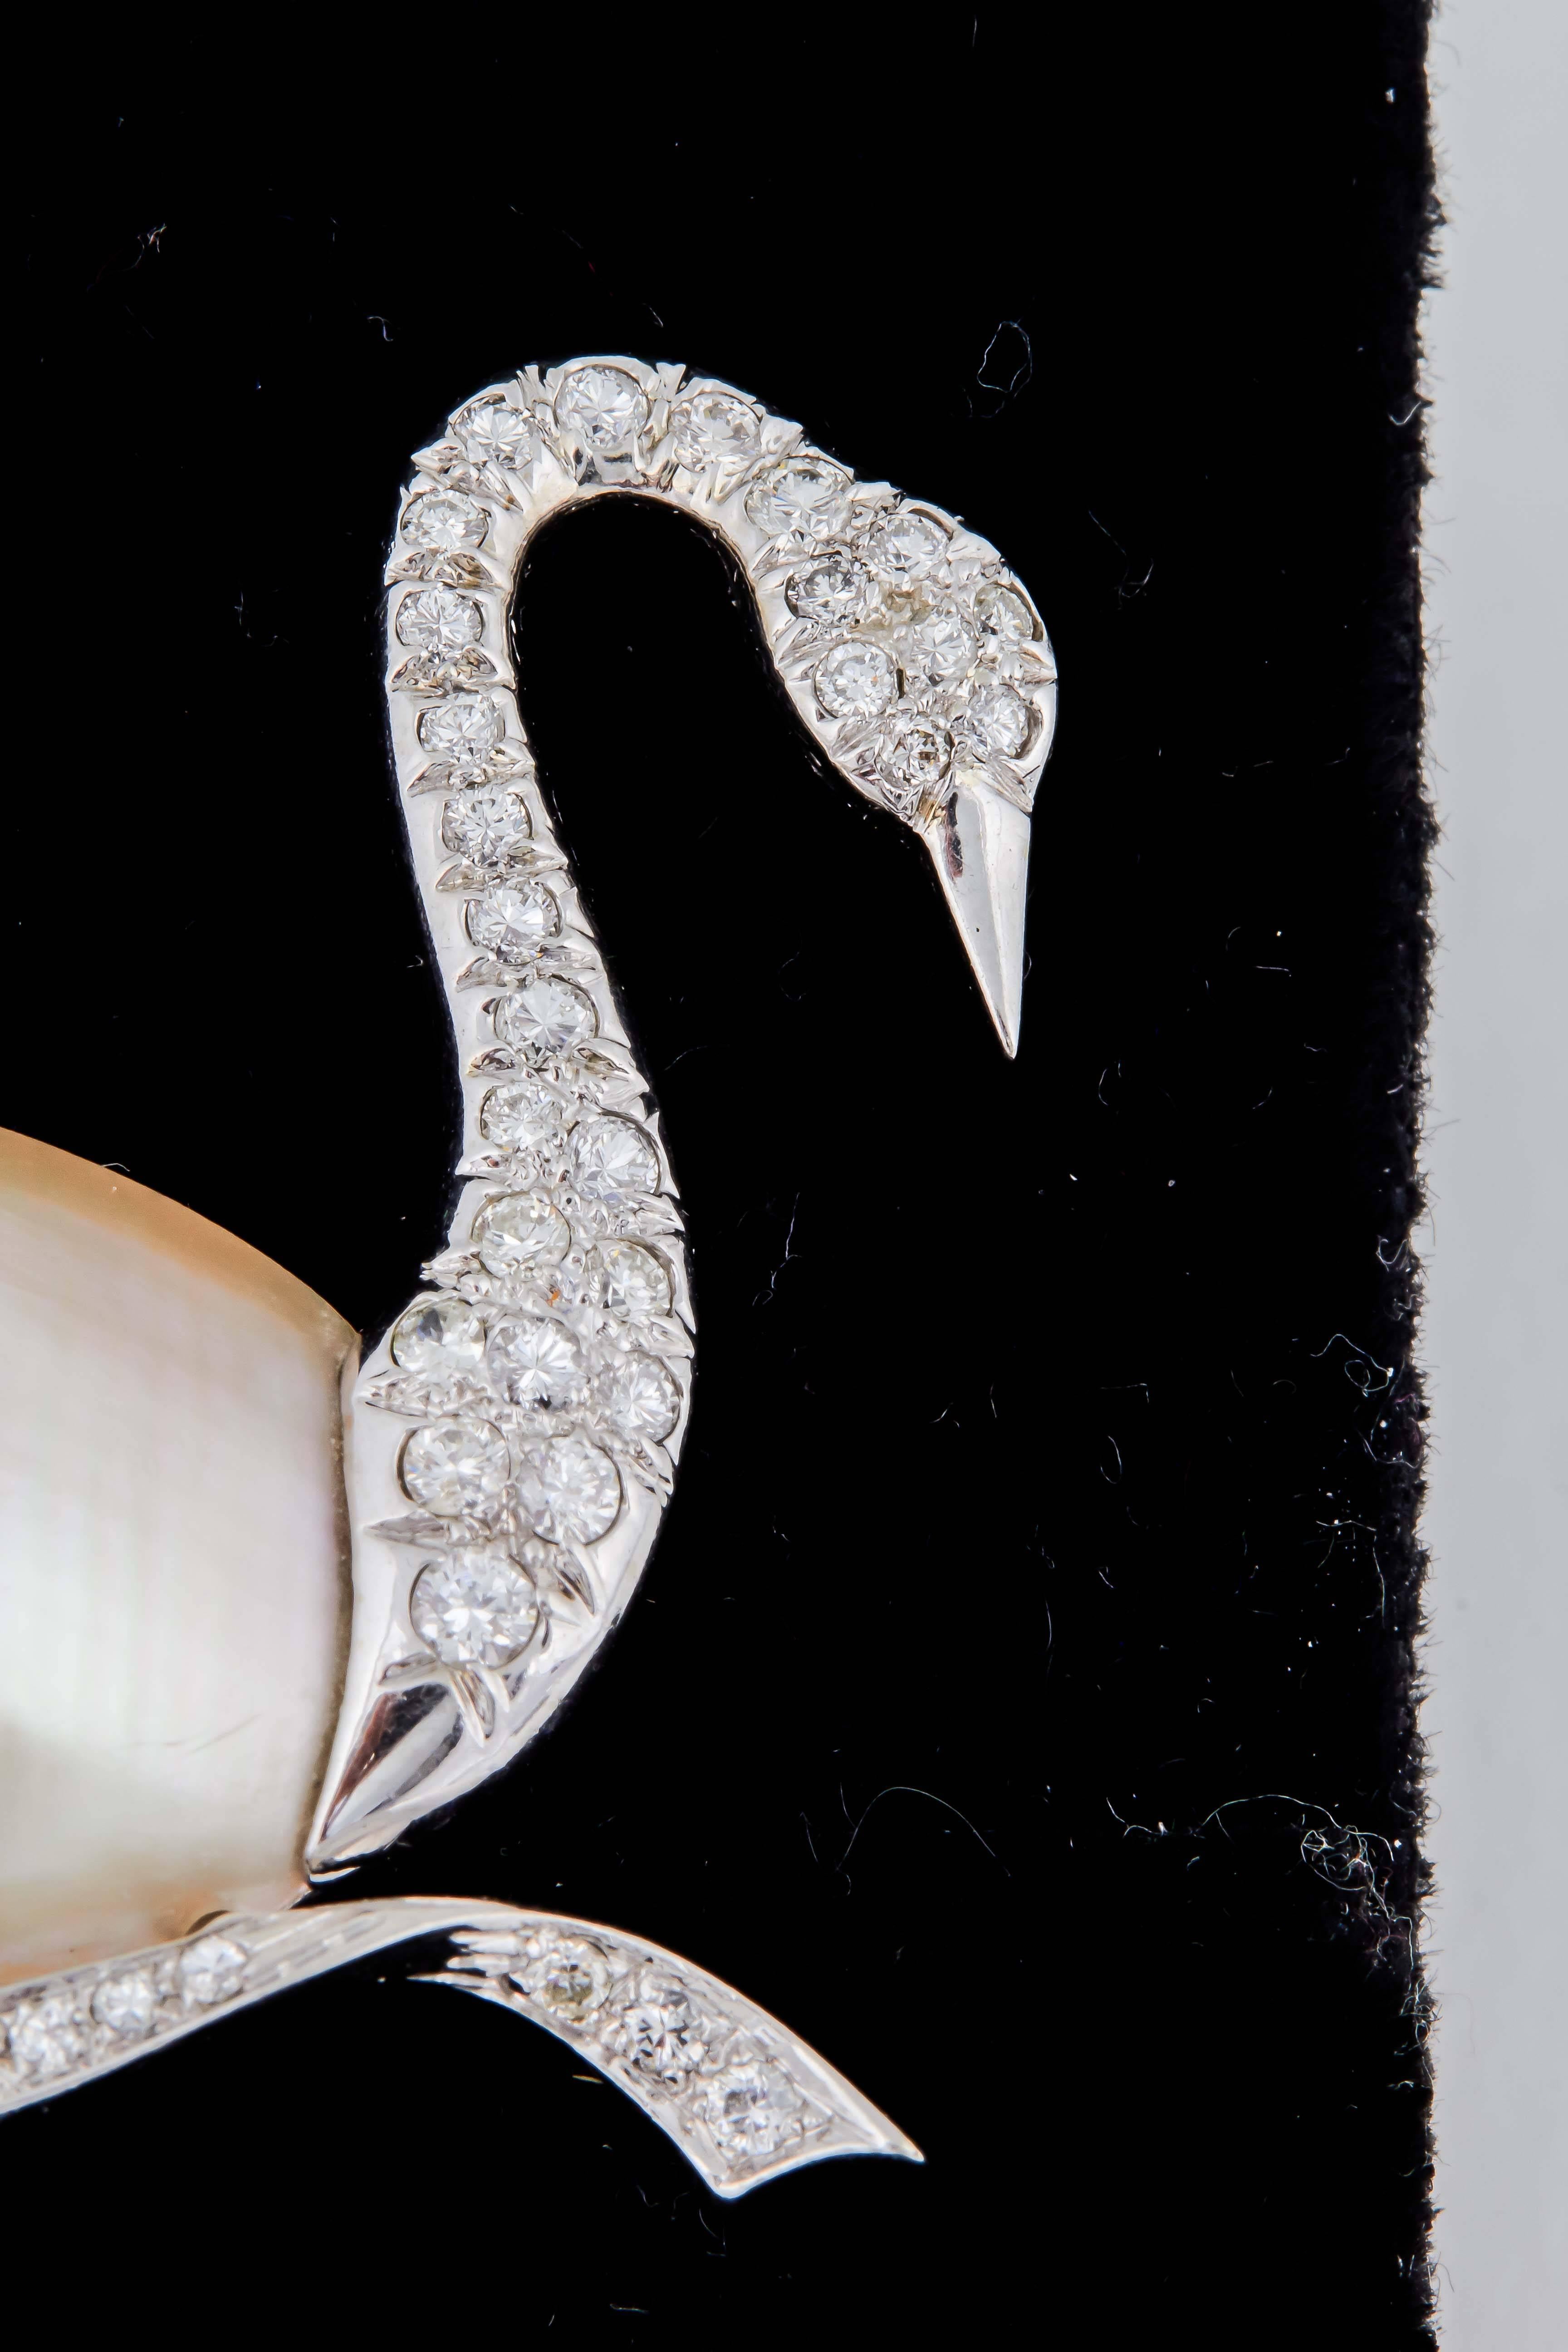 One Ladies Platinum Brooch In The Shape Of A Figural White Swan Embellished With One Large Mabe Pearl Approximately 25mm and Further Embellished With Numerous Full Cut Diamonds Weighing Approximately 1.75 cts . Made In America In The 1940's.